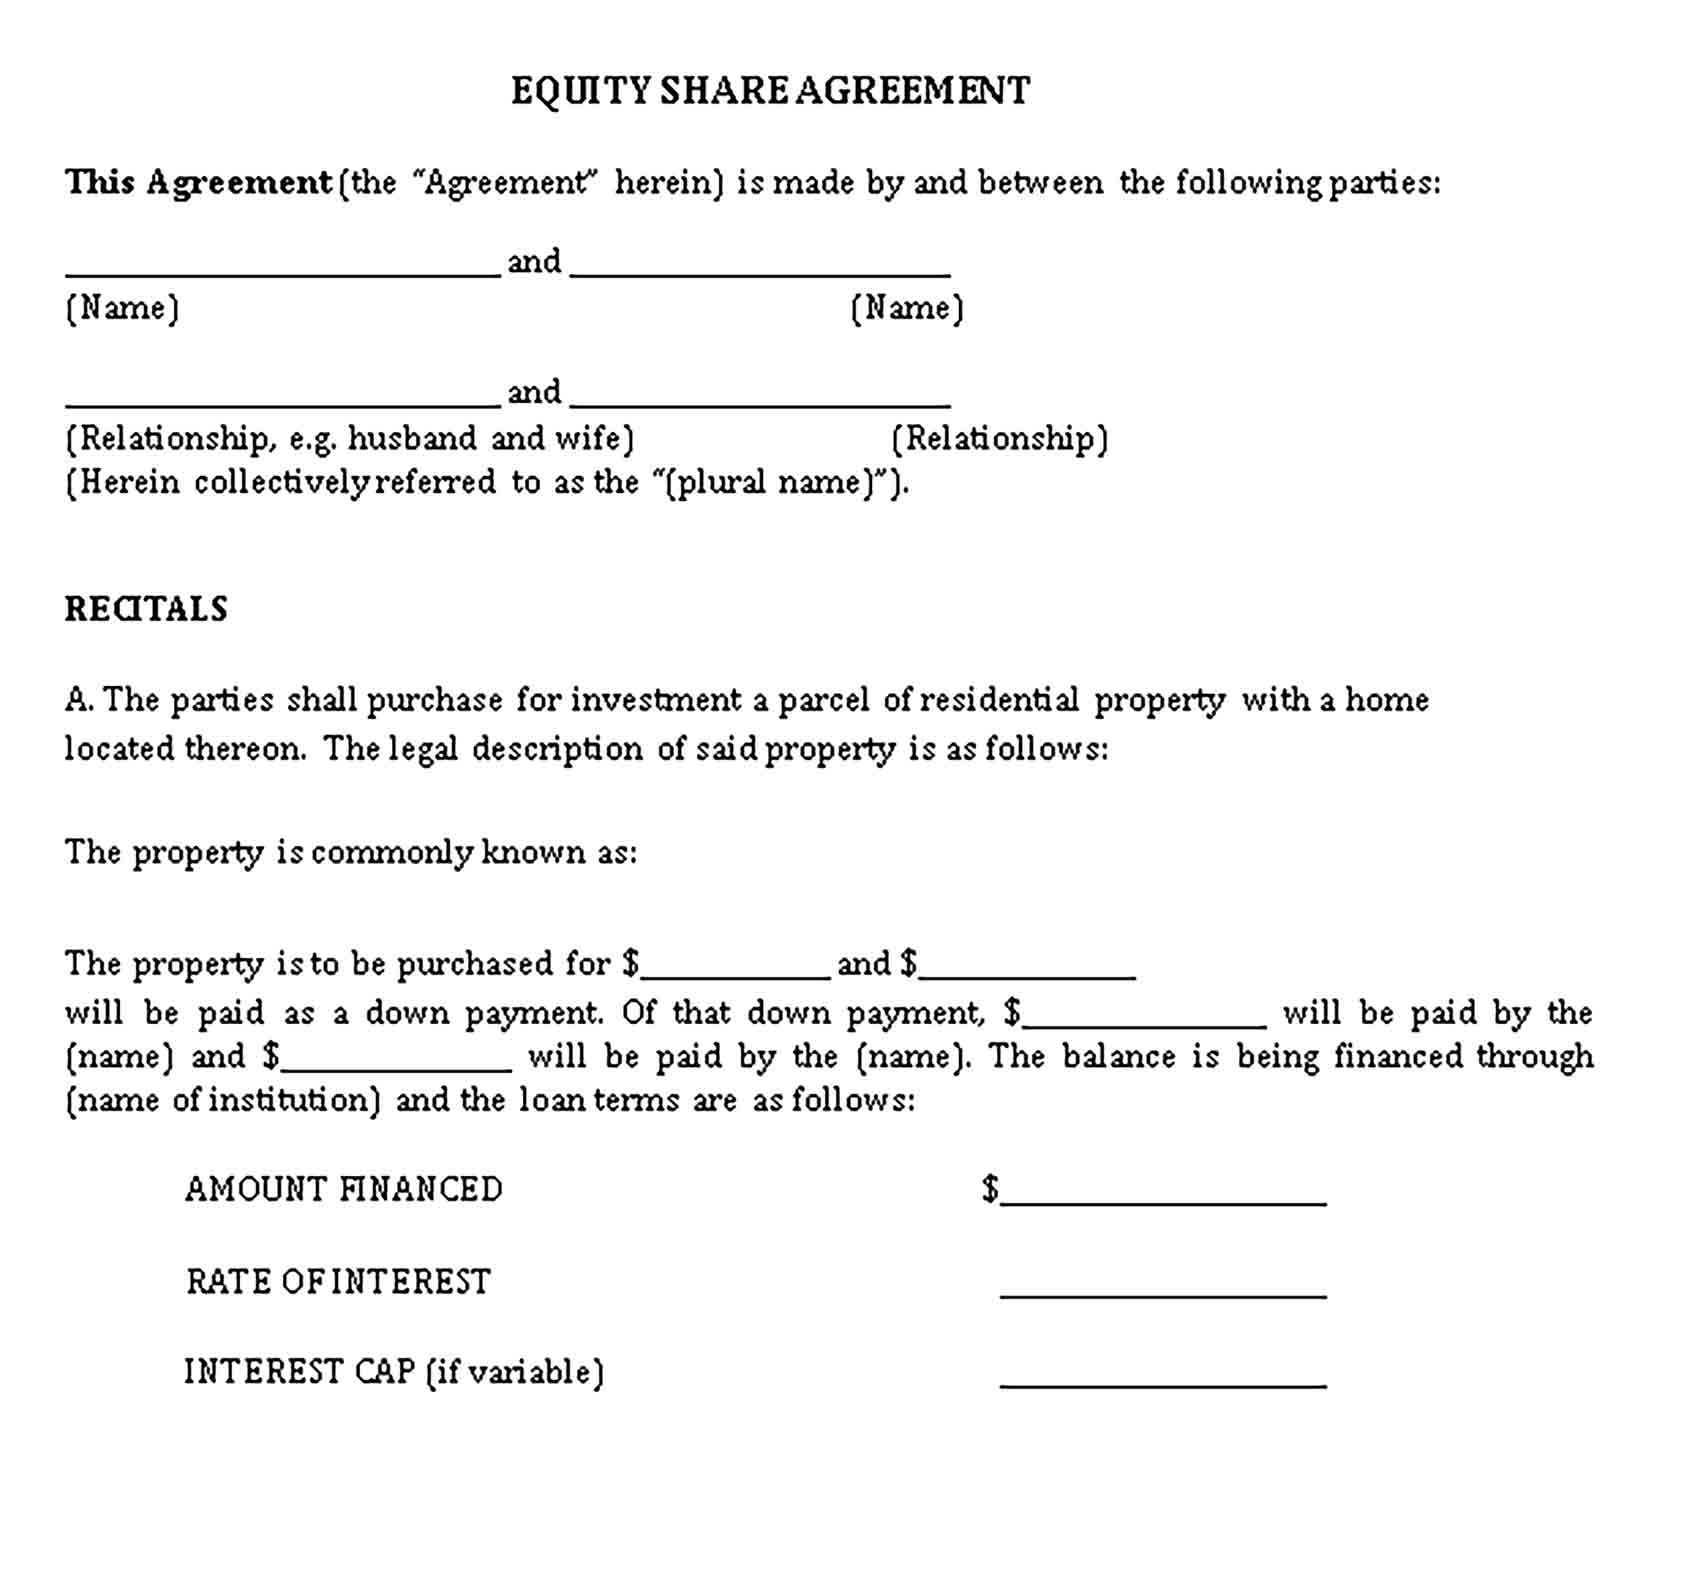 Templates Property Equity Share Agreement Sample